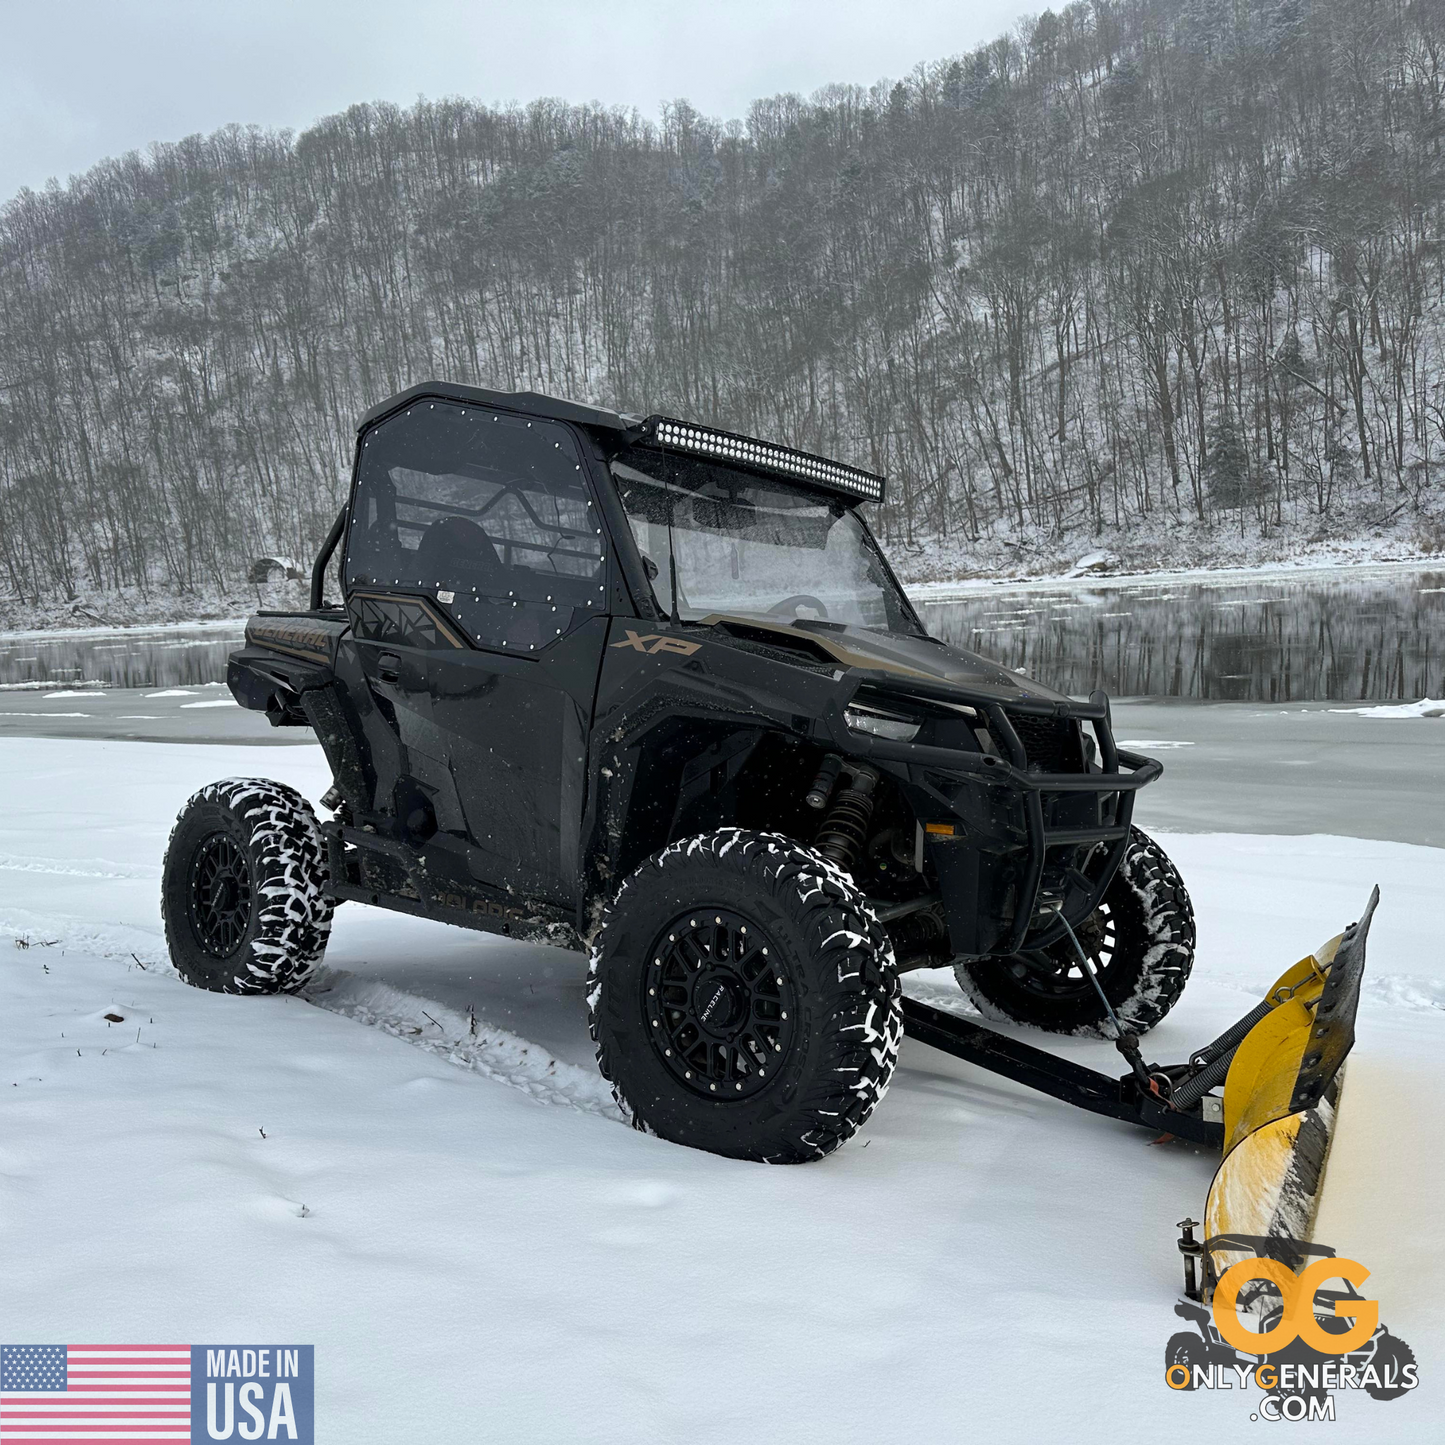 Customer submitted photo with a Polaris General plowing snow & showing off their SideskinsLITE hard upper doors from OnlyGenerals